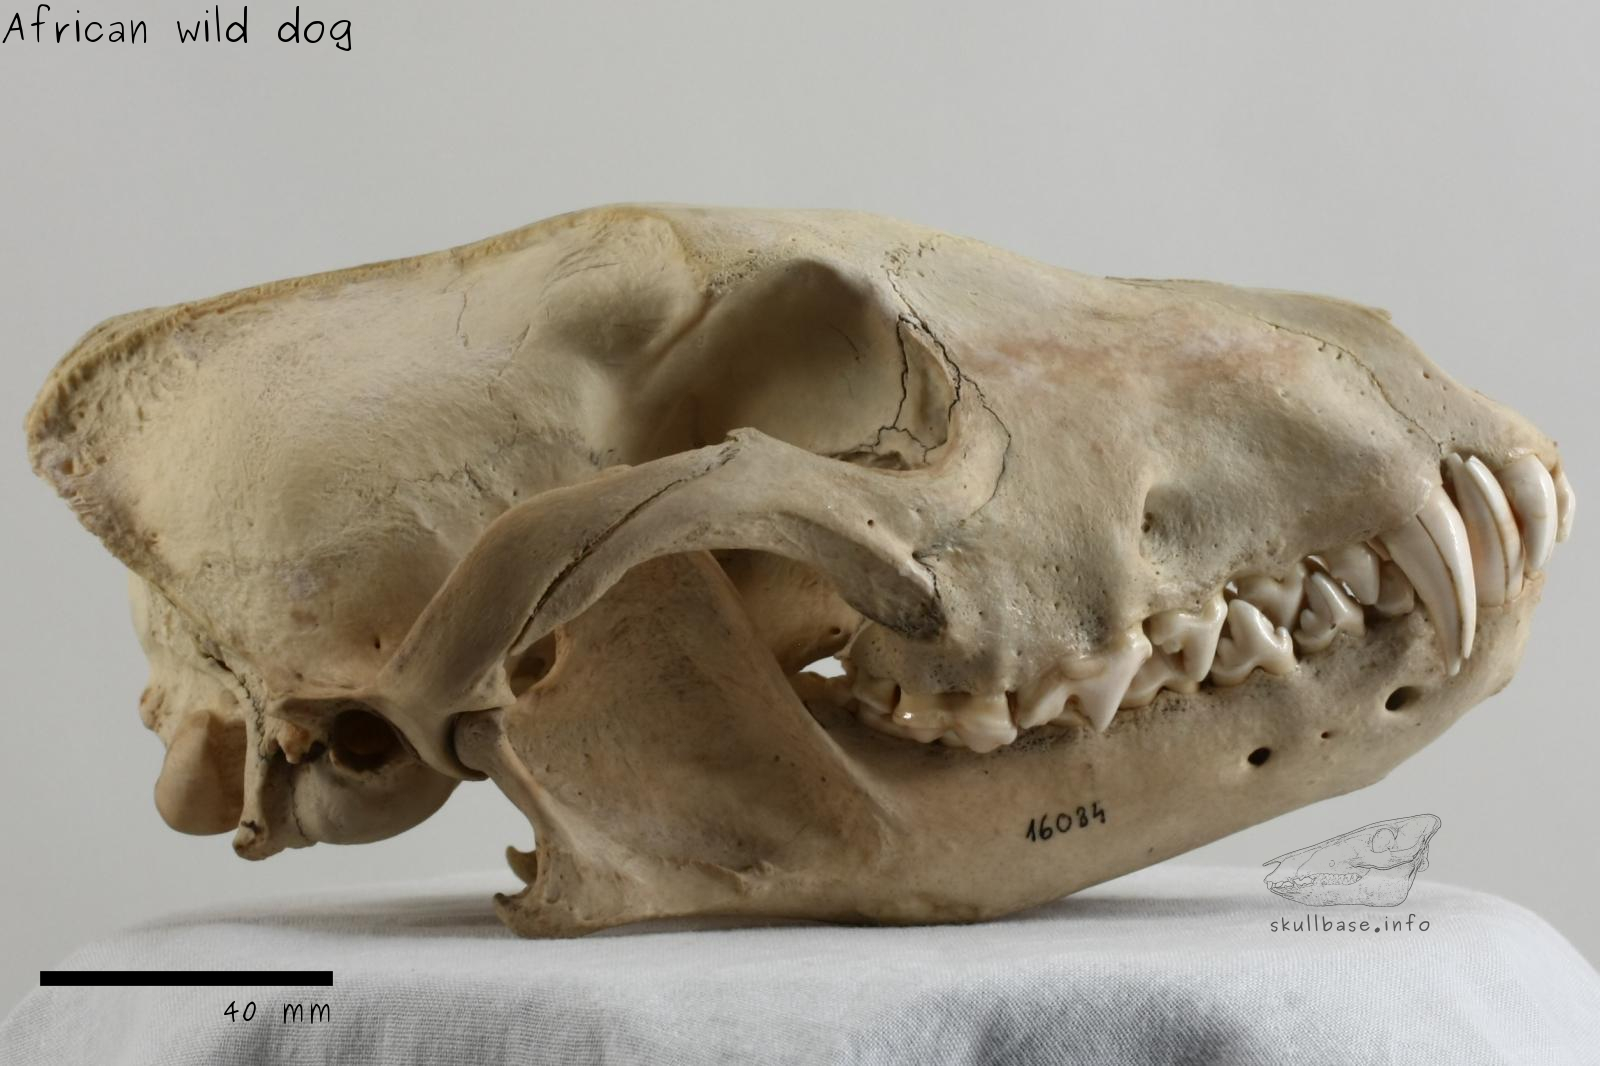 African wild dog (Lycaon pictus) skull lateral view